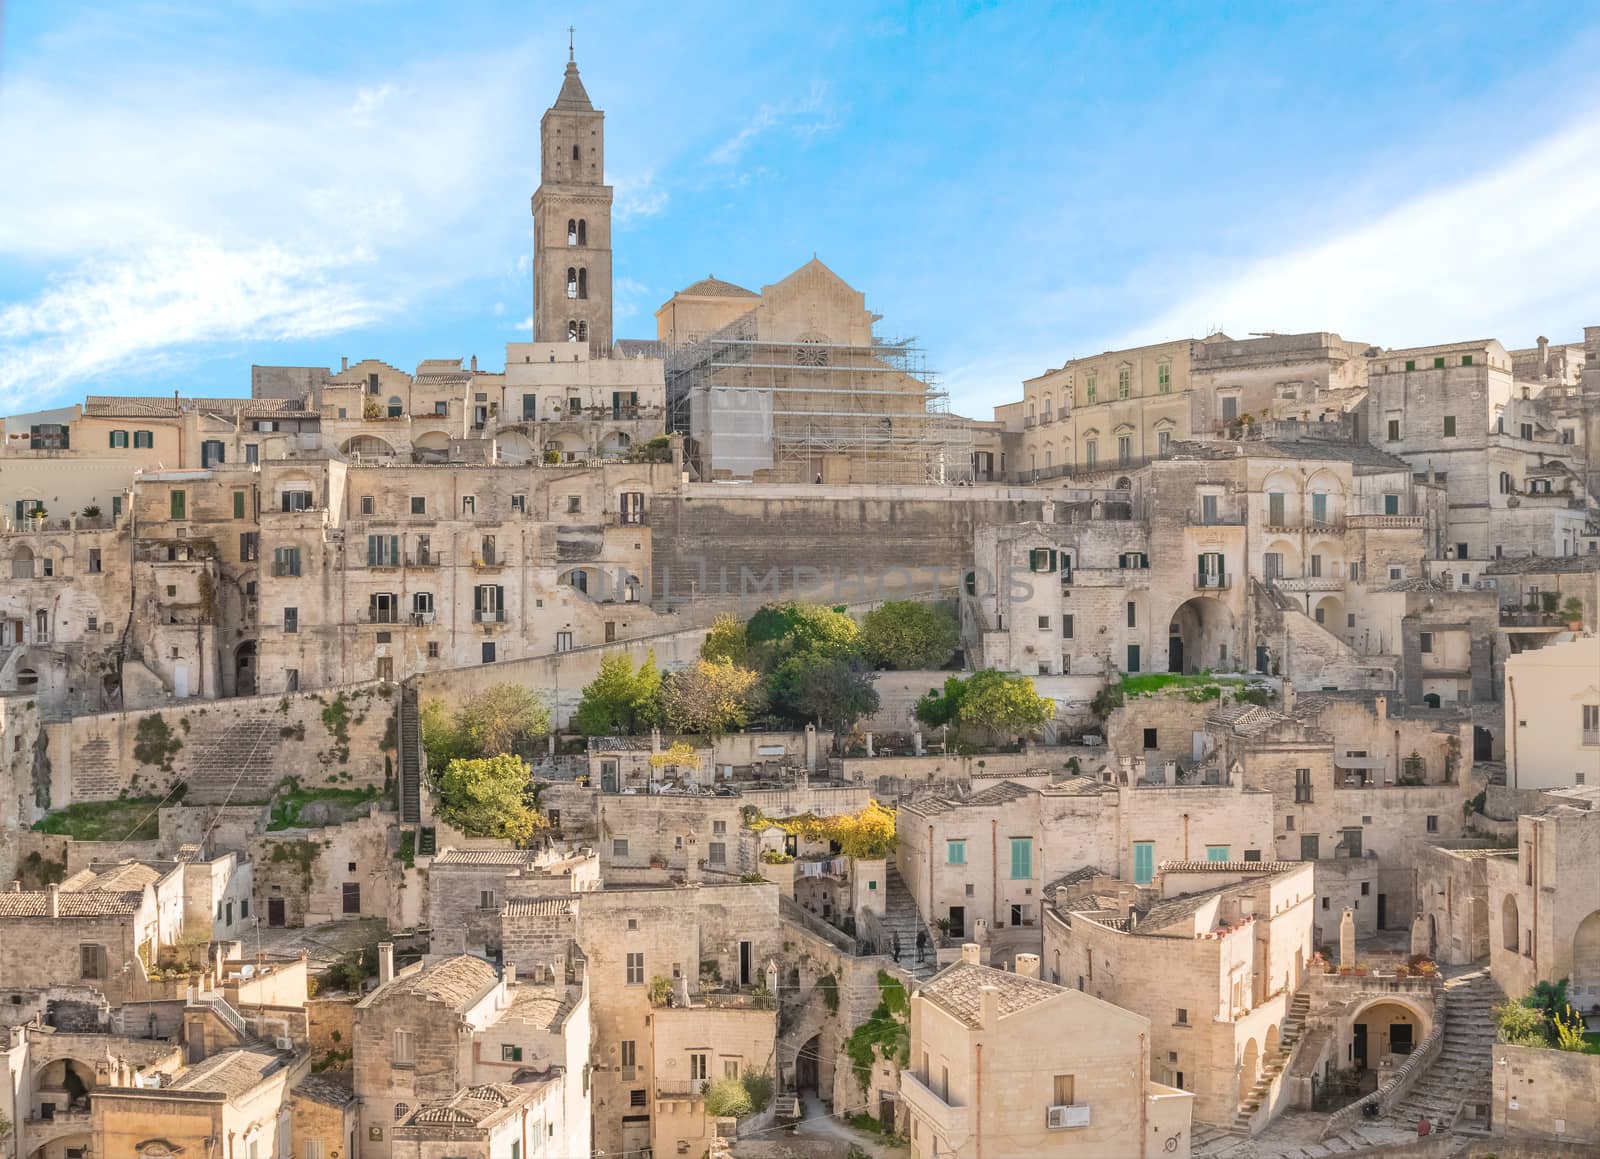 panoramic view of typical stones (Sassi di Matera) and church of Matera UNESCO European Capital of Culture 2019 under blue sky  by donfiore